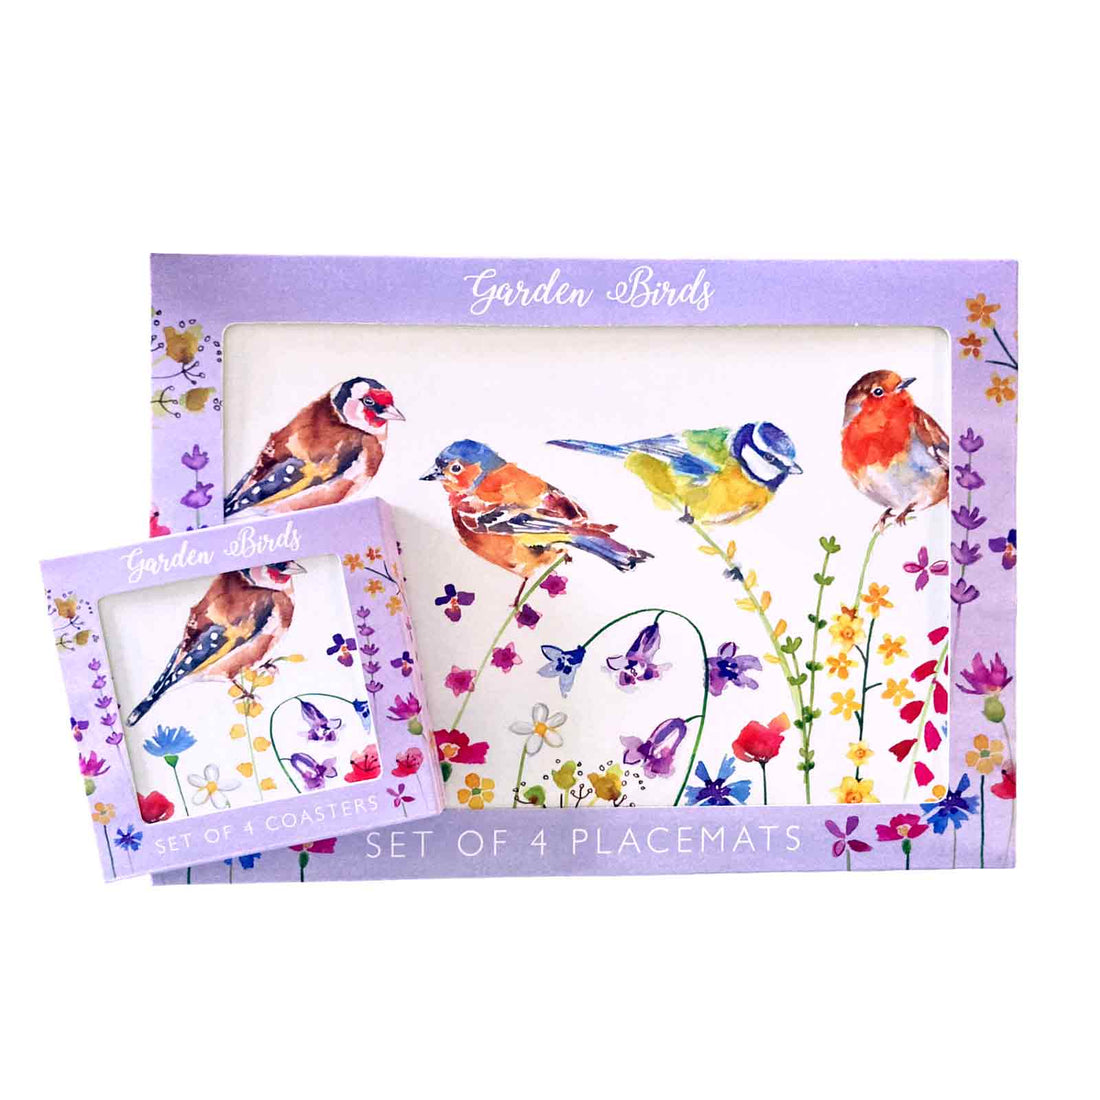 Garden Birds Placemats and Coasters Set of 4